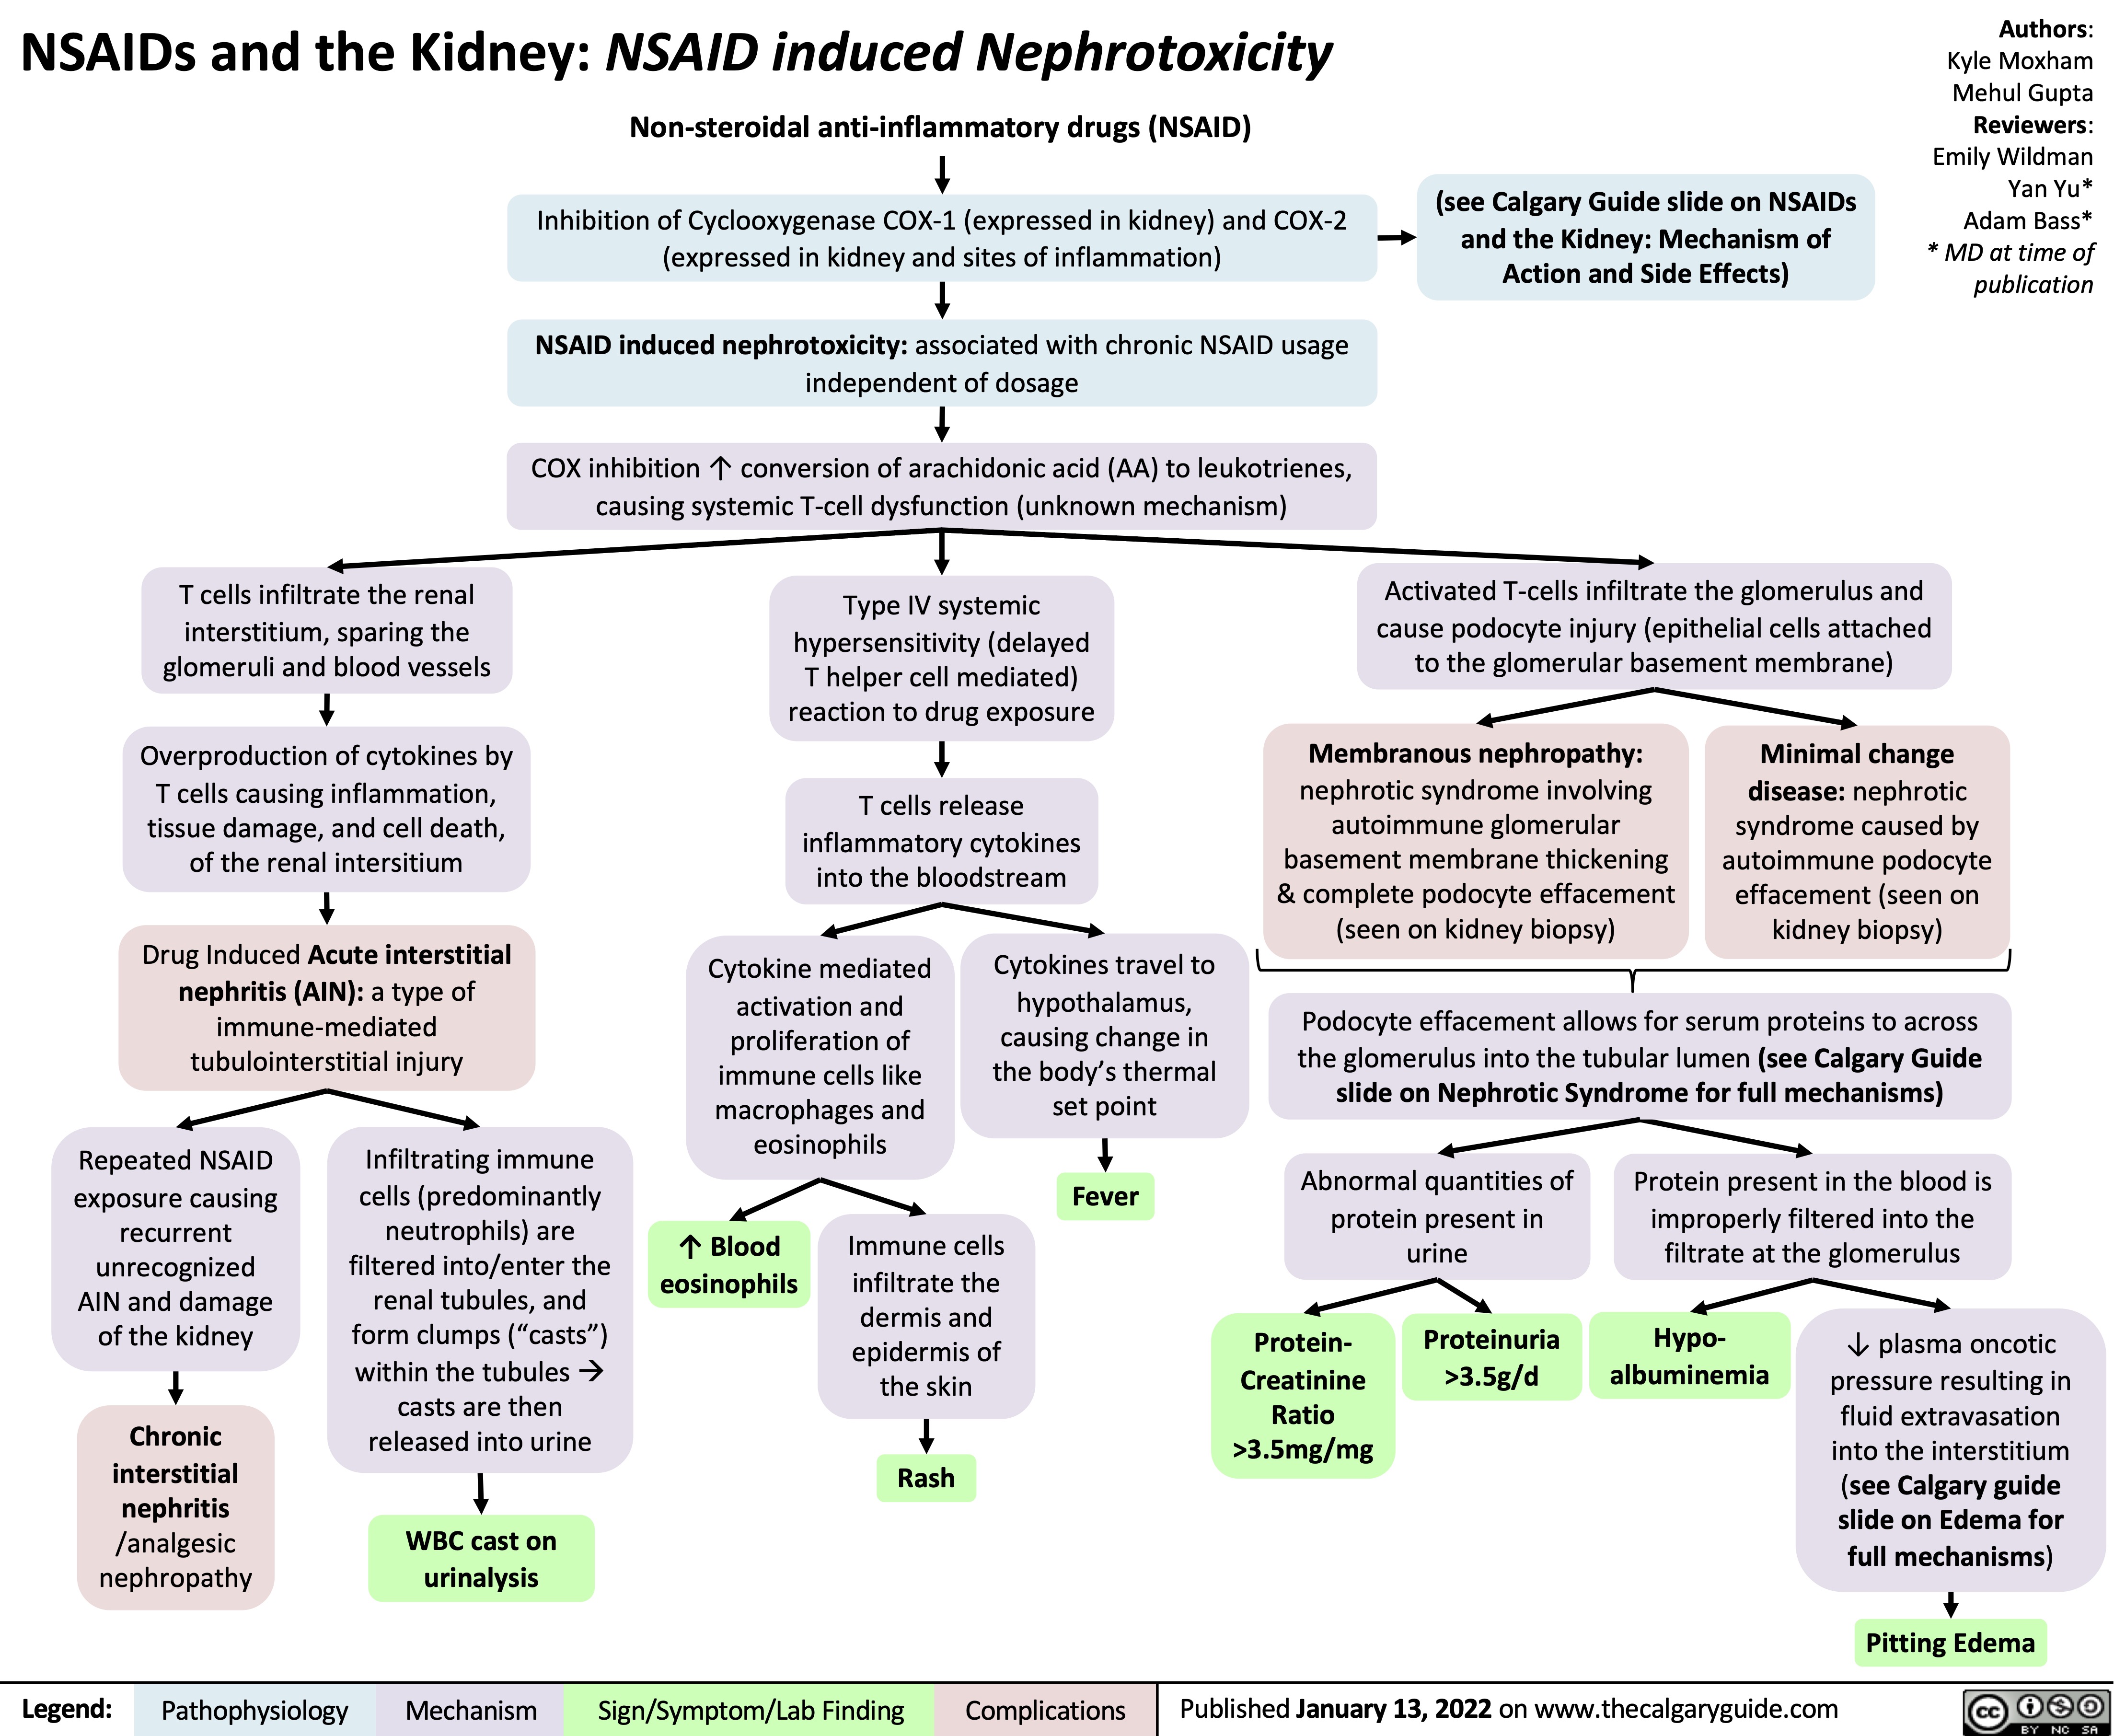 NSAIDs and the Kidney: NSAID induced Nephrotoxicity Non-steroidal anti-inflammatory drugs (NSAID)
Authors: Kyle Moxham Mehul Gupta Reviewers: Emily Wildman Yan Yu* Adam Bass* * MD at time of publication
  Inhibition of Cyclooxygenase COX-1 (expressed in kidney) and COX-2 (expressed in kidney and sites of inflammation)
NSAID induced nephrotoxicity: associated with chronic NSAID usage independent of dosage
COX inhibition ↑ conversion of arachidonic acid (AA) to leukotrienes, causing systemic T-cell dysfunction (unknown mechanism)
Type IV systemic hypersensitivity (delayed
T helper cell mediated) reaction to drug exposure
T cells release inflammatory cytokines into the bloodstream
(see Calgary Guide slide on NSAIDs and the Kidney: Mechanism of Action and Side Effects)
       T cells infiltrate the renal interstitium, sparing the glomeruli and blood vessels
Overproduction of cytokines by T cells causing inflammation,
tissue damage, and cell death, of the renal intersitium
Drug Induced Acute interstitial nephritis (AIN): a type of immune-mediated tubulointerstitial injury
Activated T-cells infiltrate the glomerulus and cause podocyte injury (epithelial cells attached to the glomerular basement membrane)
    Membranous nephropathy:
nephrotic syndrome involving autoimmune glomerular basement membrane thickening & complete podocyte effacement (seen on kidney biopsy)
Minimal change disease: nephrotic syndrome caused by autoimmune podocyte effacement (seen on kidney biopsy)
      Cytokine mediated activation and
proliferation of immune cells like macrophages and eosinophils
Cytokines travel to hypothalamus,
causing change in the body’s thermal set point
Fever
Podocyte effacement allows for serum proteins to across the glomerulus into the tubular lumen (see Calgary Guide slide on Nephrotic Syndrome for full mechanisms)
      Repeated NSAID exposure causing
recurrent unrecognized AIN and damage of the kidney
Chronic interstitial nephritis /analgesic nephropathy
Infiltrating immune cells (predominantly neutrophils) are filtered into/enter the renal tubules, and form clumps (“casts”) within the tubulesà casts are then released into urine
WBC cast on urinalysis
↑ Blood eosinophils
Immune cells infiltrate the
dermis and epidermis of the skin
Rash
Abnormal quantities of protein present in urine
Protein present in the blood is improperly filtered into the filtrate at the glomerulus
           Protein- Creatinine
Ratio >3.5mg/mg
Proteinuria >3.5g/d
Hypo- albuminemia
↓ plasma oncotic pressure resulting in fluid extravasation into the interstitium (see Calgary guide slide on Edema for full mechanisms)
   Pitting Edema
 Legend:
 Pathophysiology
Mechanism
Sign/Symptom/Lab Finding
 Complications
 Published January 13, 2022 on www.thecalgaryguide.com
   